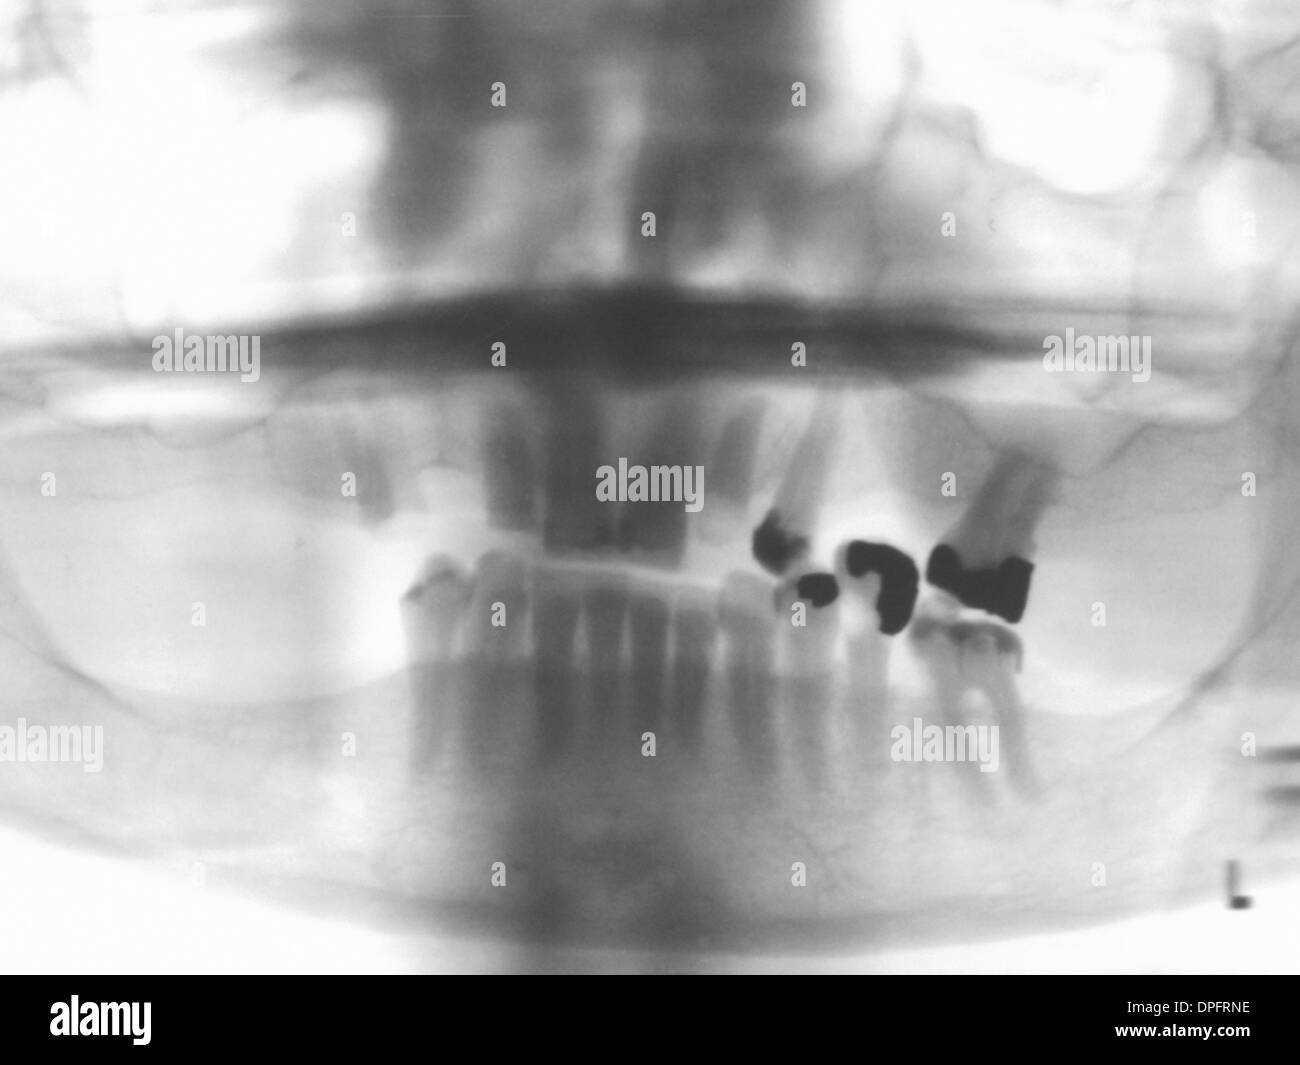 x-ray of showing dental fillings and missing teeth Stock Photo